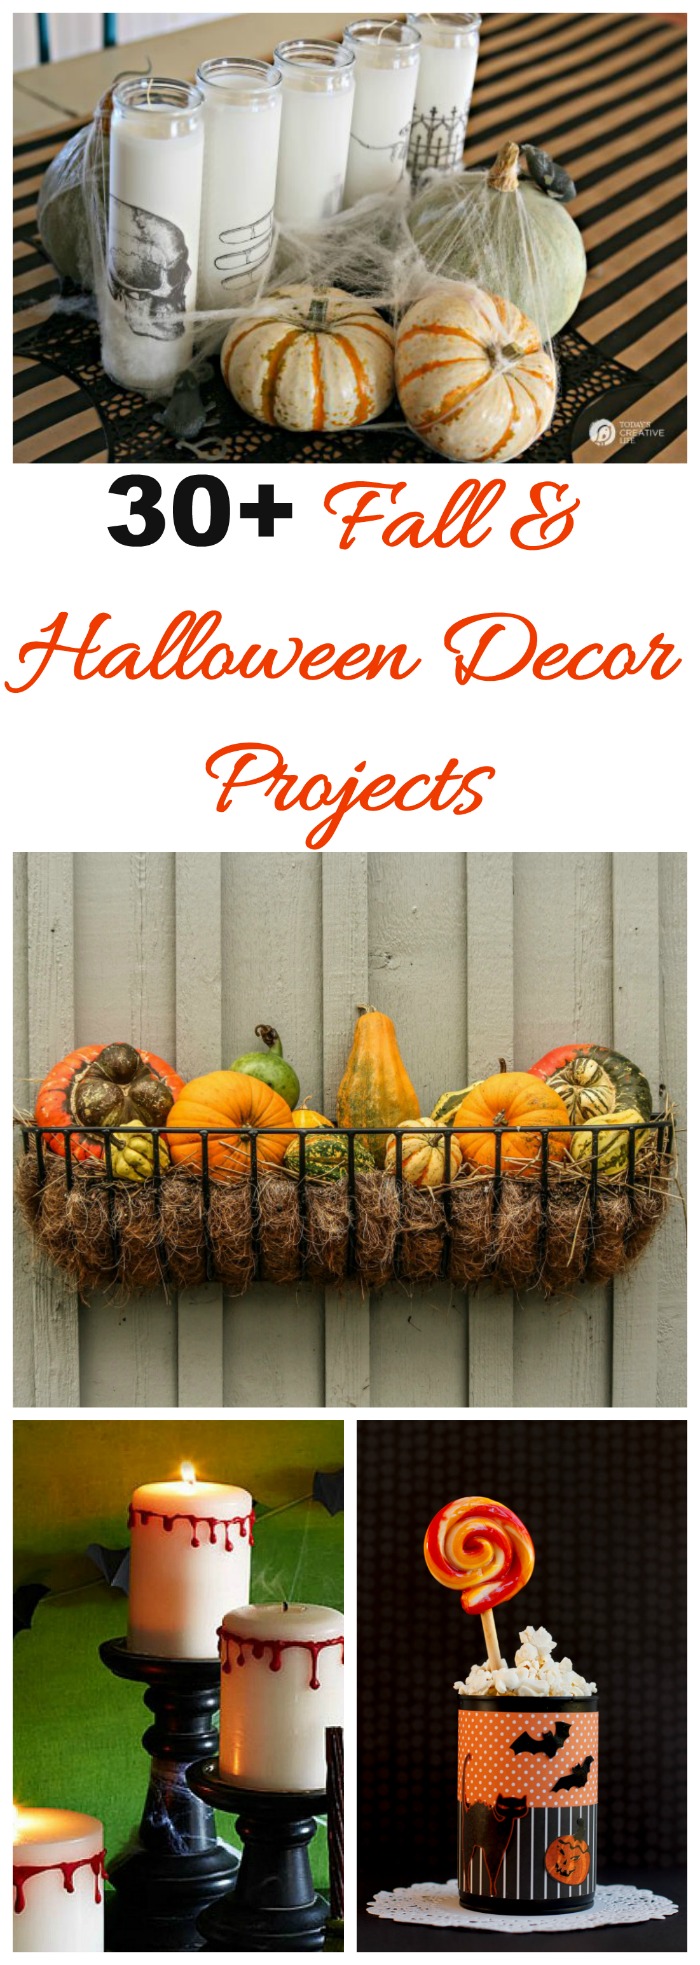 Thees 30+ Halloween Decor projects will transform your home into a spooky and eerie place for the holiday